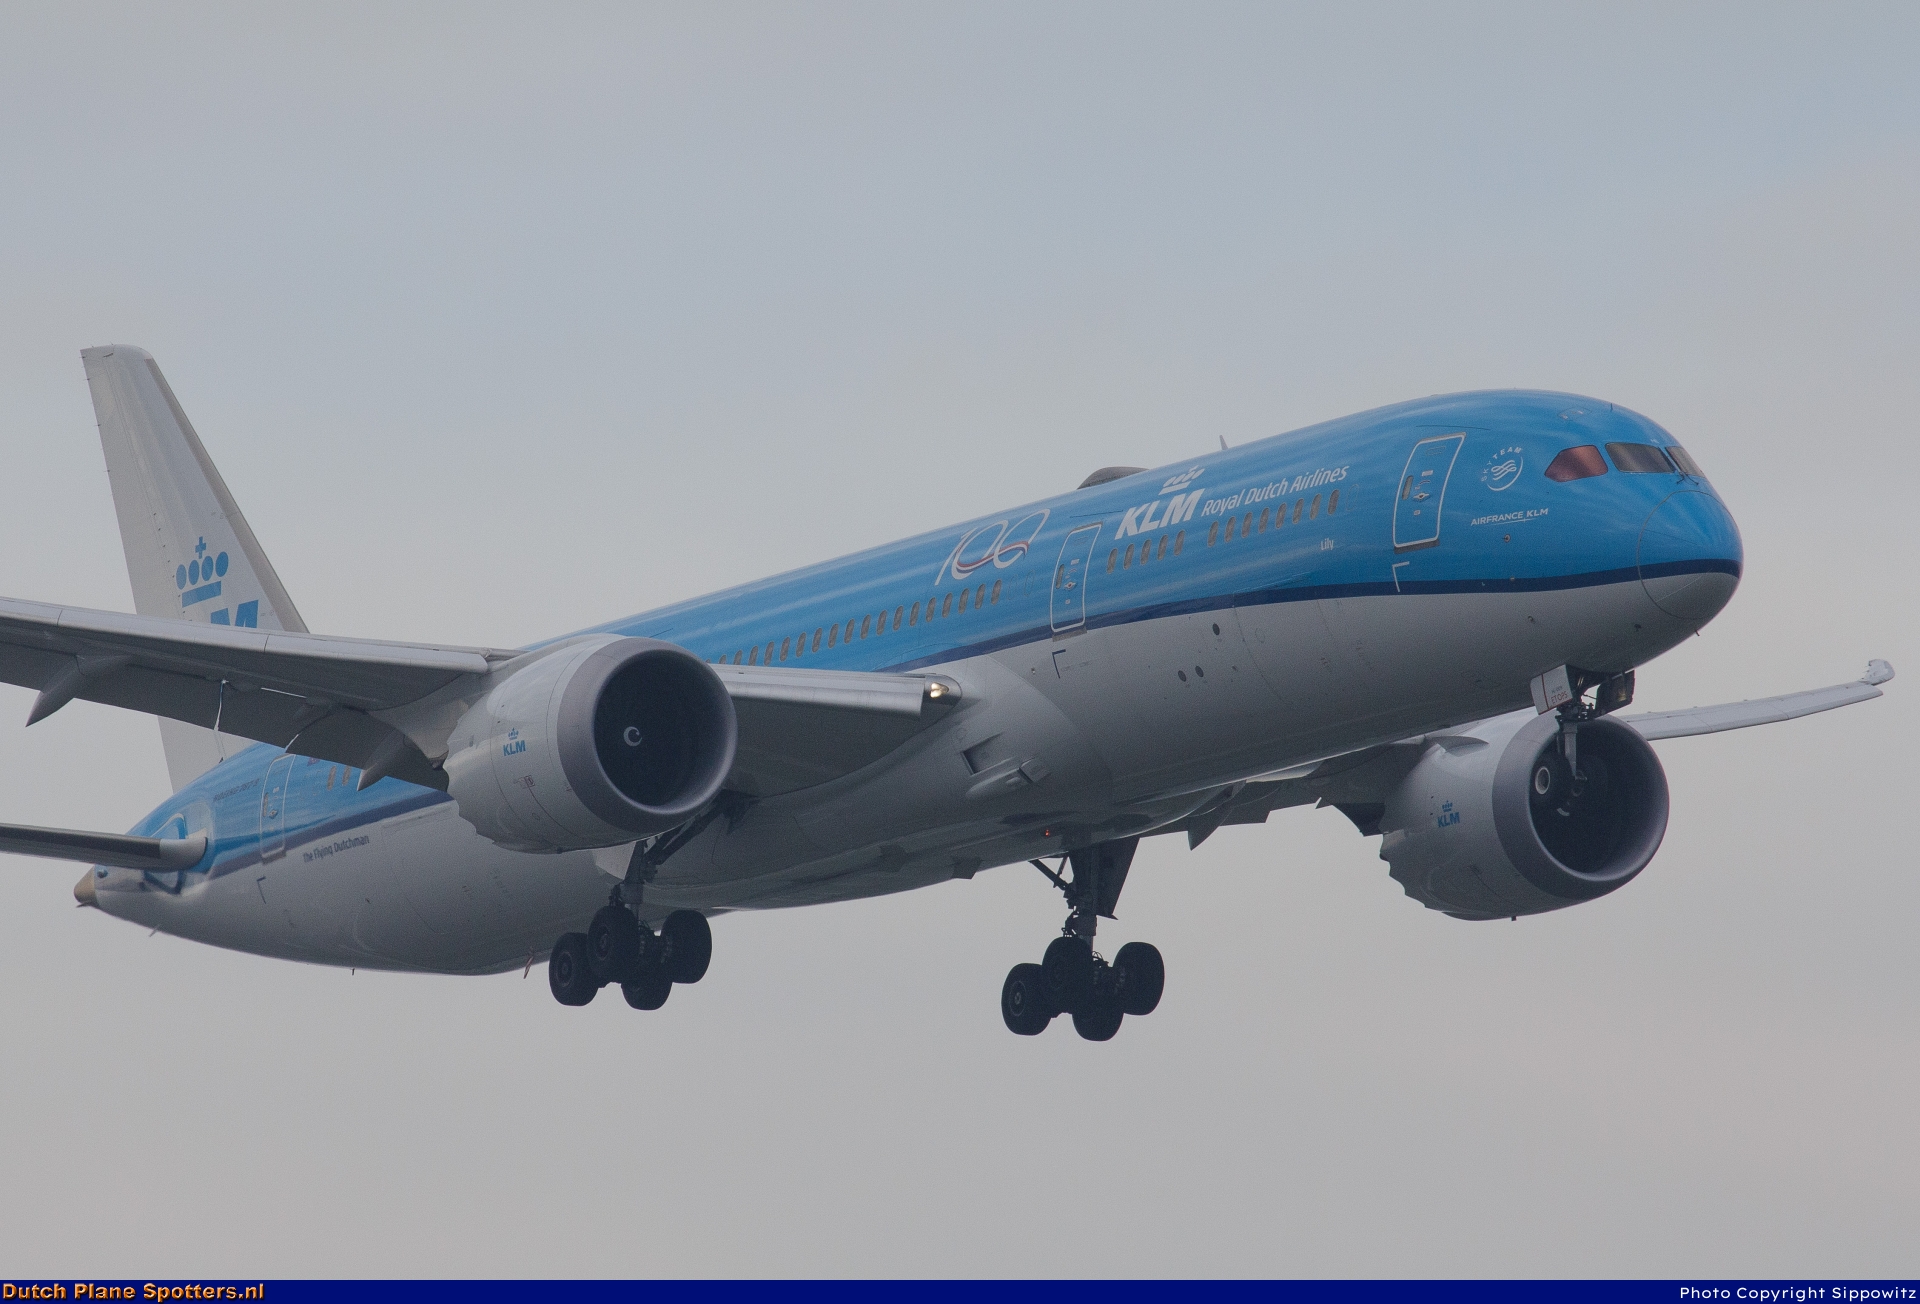 PH-BHL Boeing 787-9 Dreamliner KLM Royal Dutch Airlines by Sippowitz